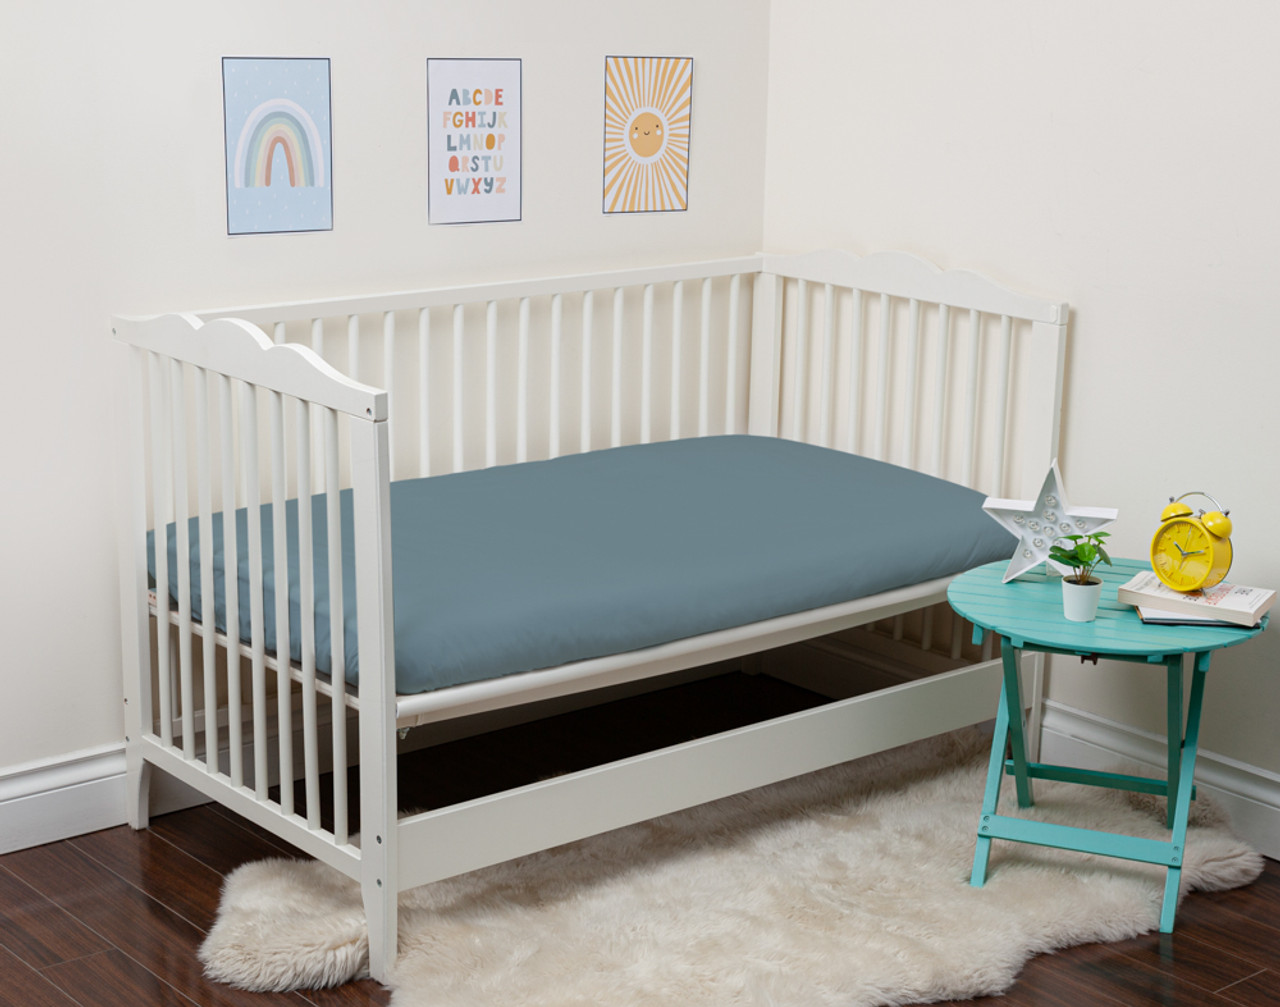 Our Bamboo Cotton Crib-Sized Fitted Sheet in Spruce dressed over a small mattress in an open crib.